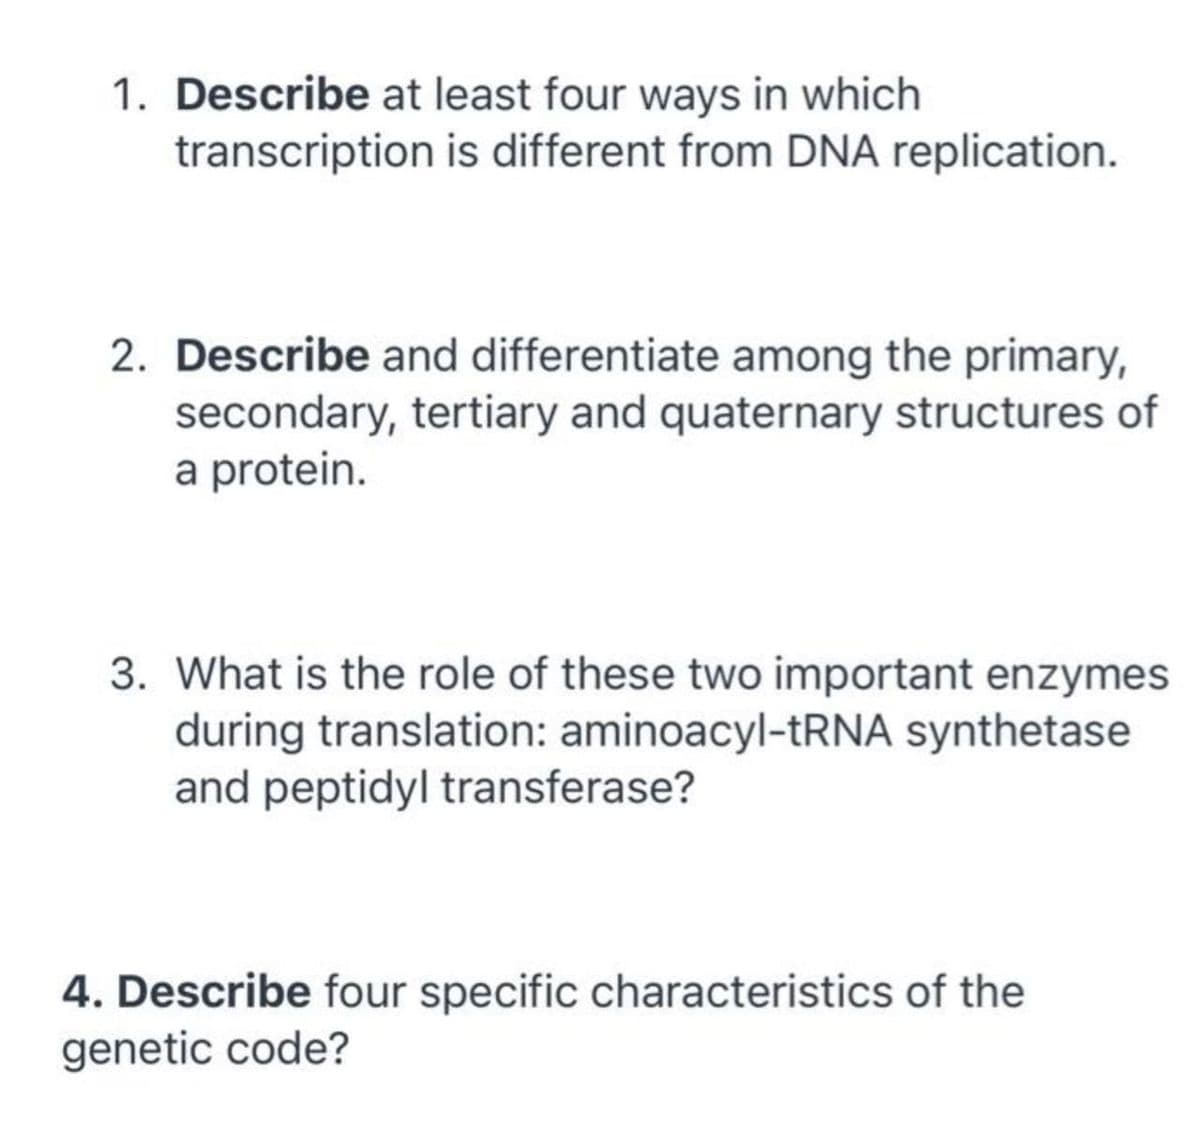 1. Describe at least four ways in which
transcription is different from DNA replication.
2. Describe and differentiate among the primary,
secondary, tertiary and quaternary structures of
a protein.
3. What is the role of these two important enzymes
during translation: aminoacyl-tRNA synthetase
and peptidyl transferase?
4. Describe four specific characteristics of the
genetic code?
